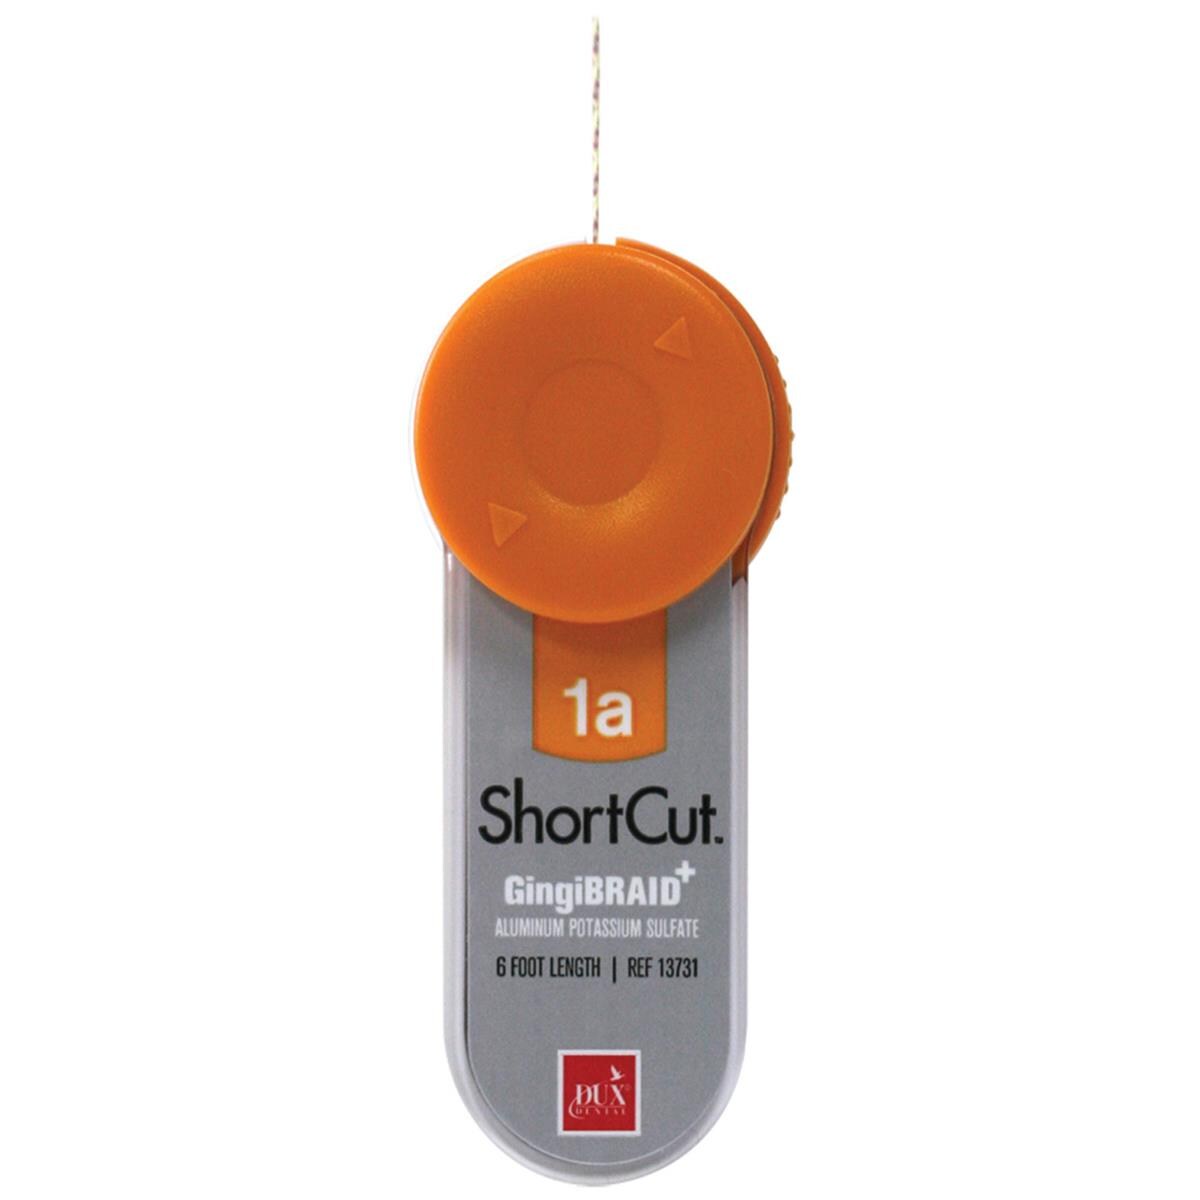 Shortcut Cord Dispensing System 1A Impregnated